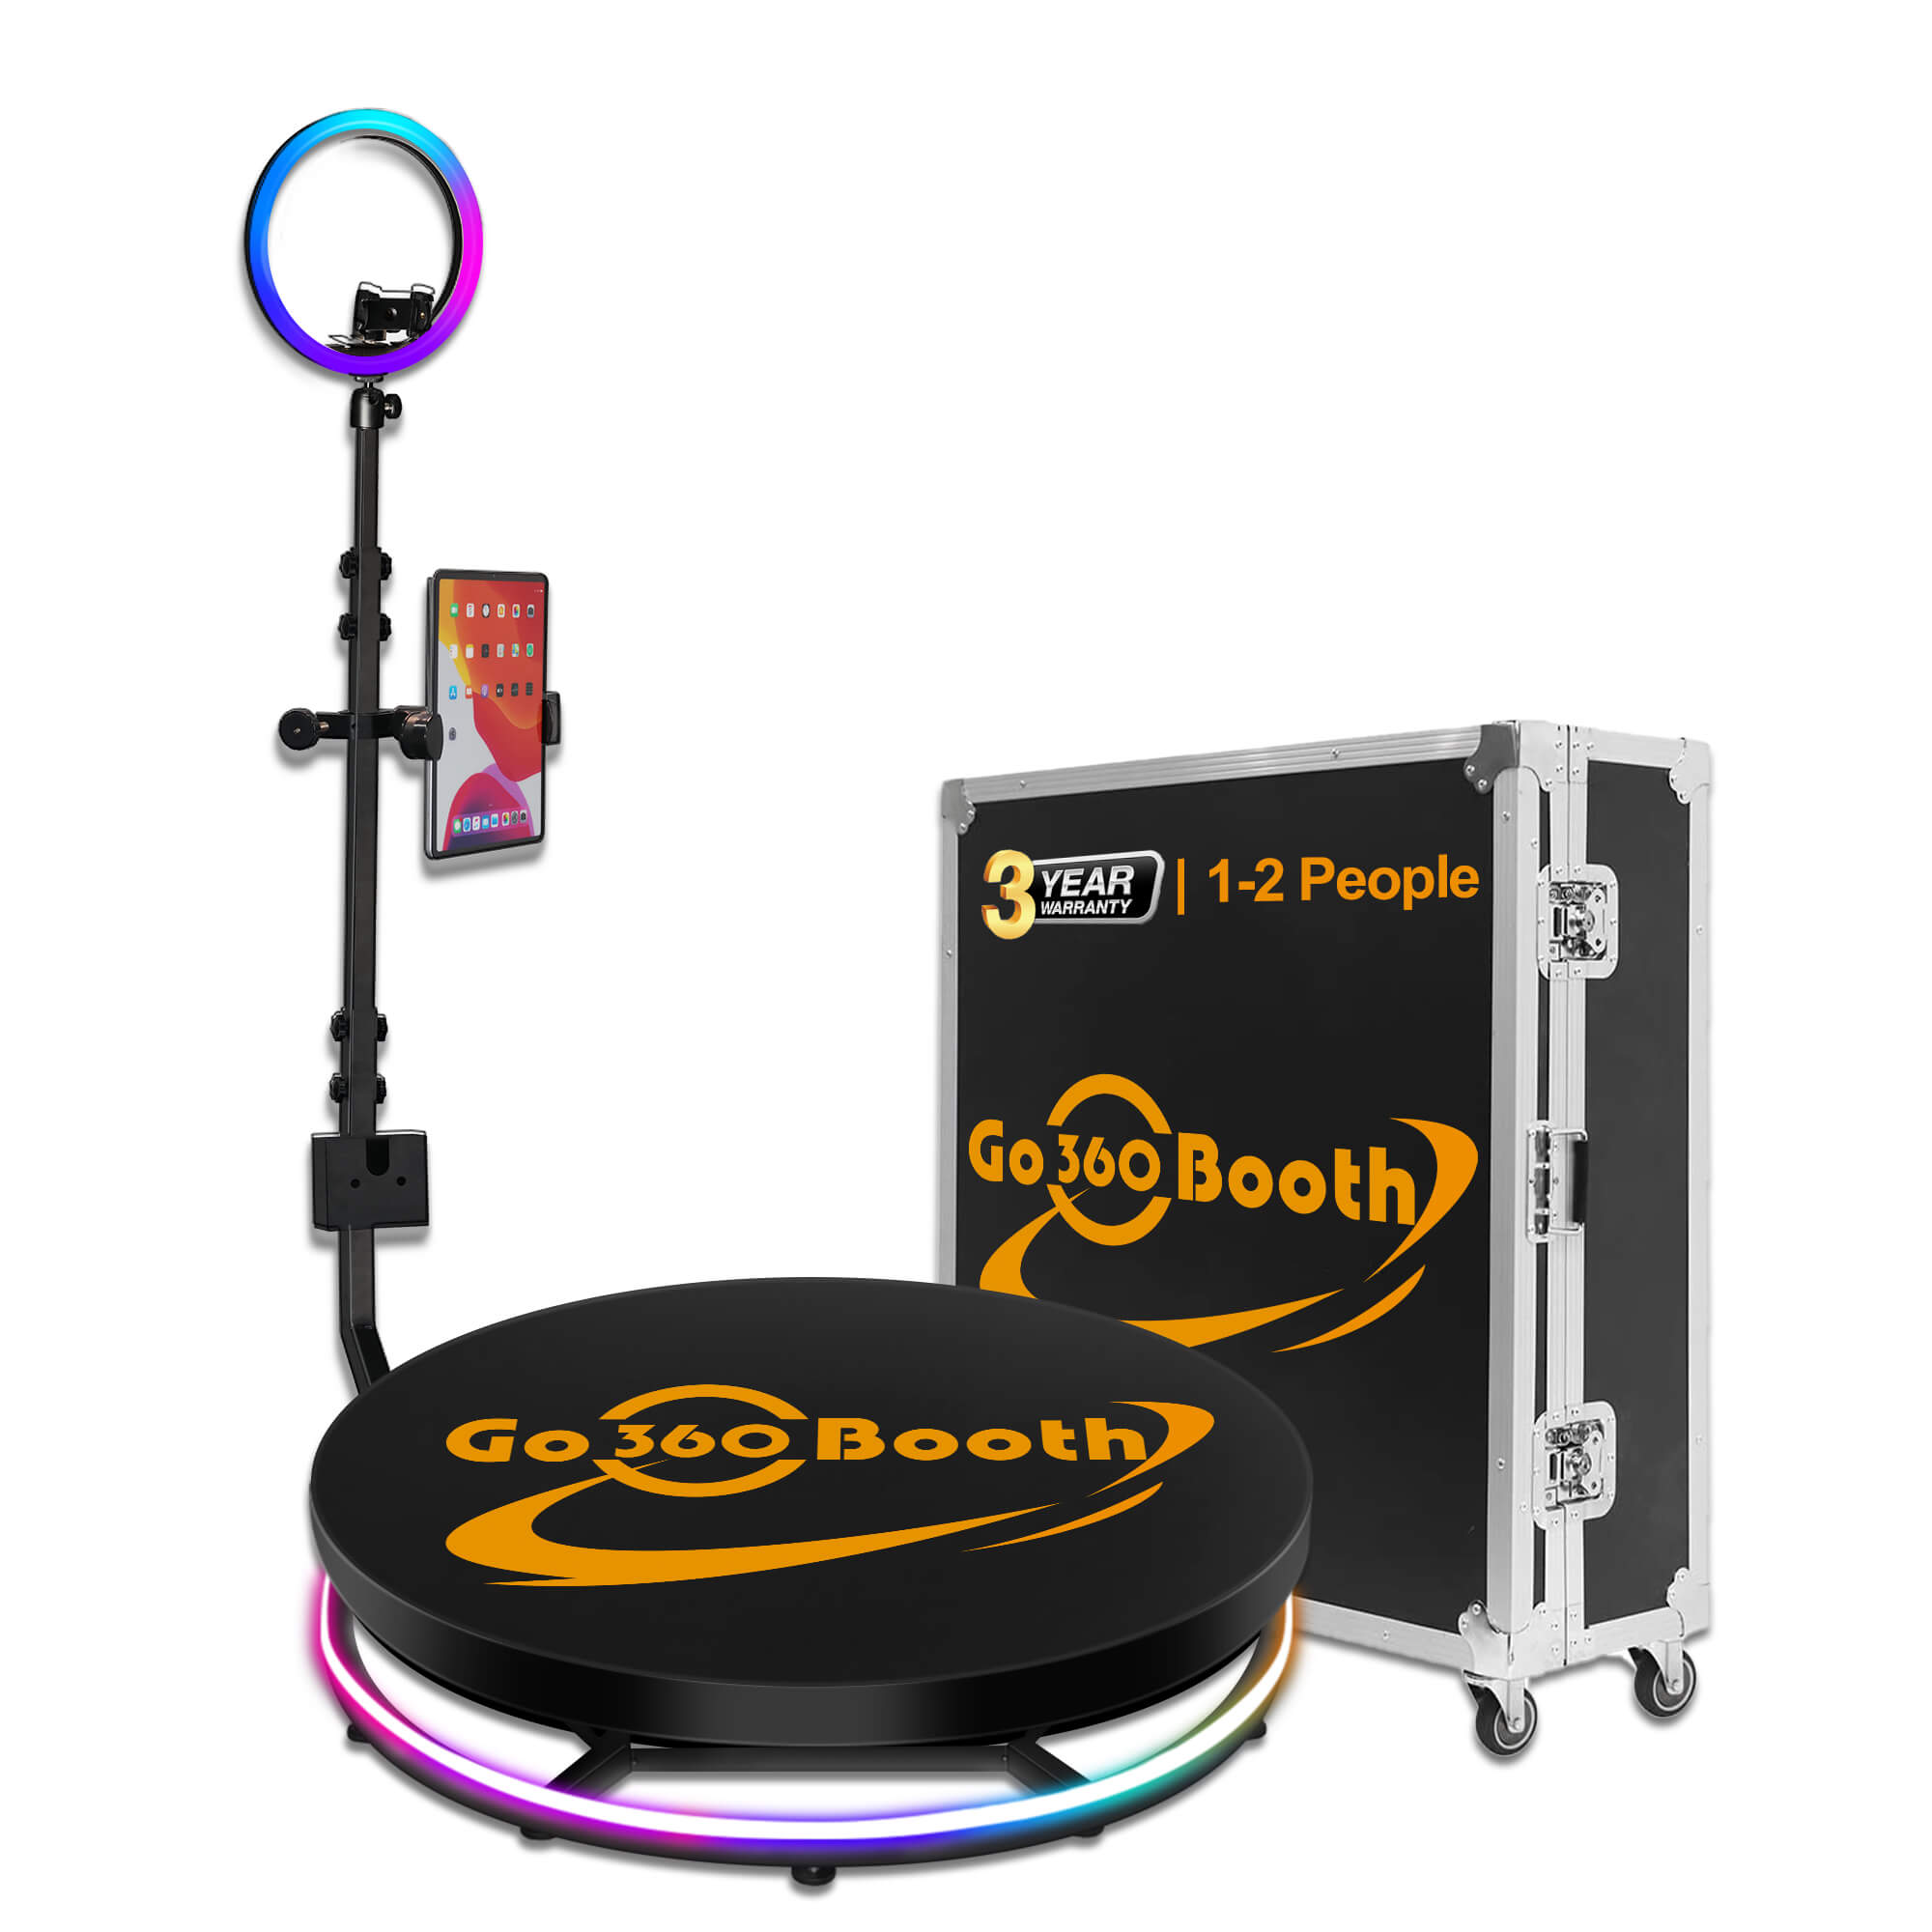 360 Video and Photo Booth Spinning Display Platform - 39 (100cm) Inches